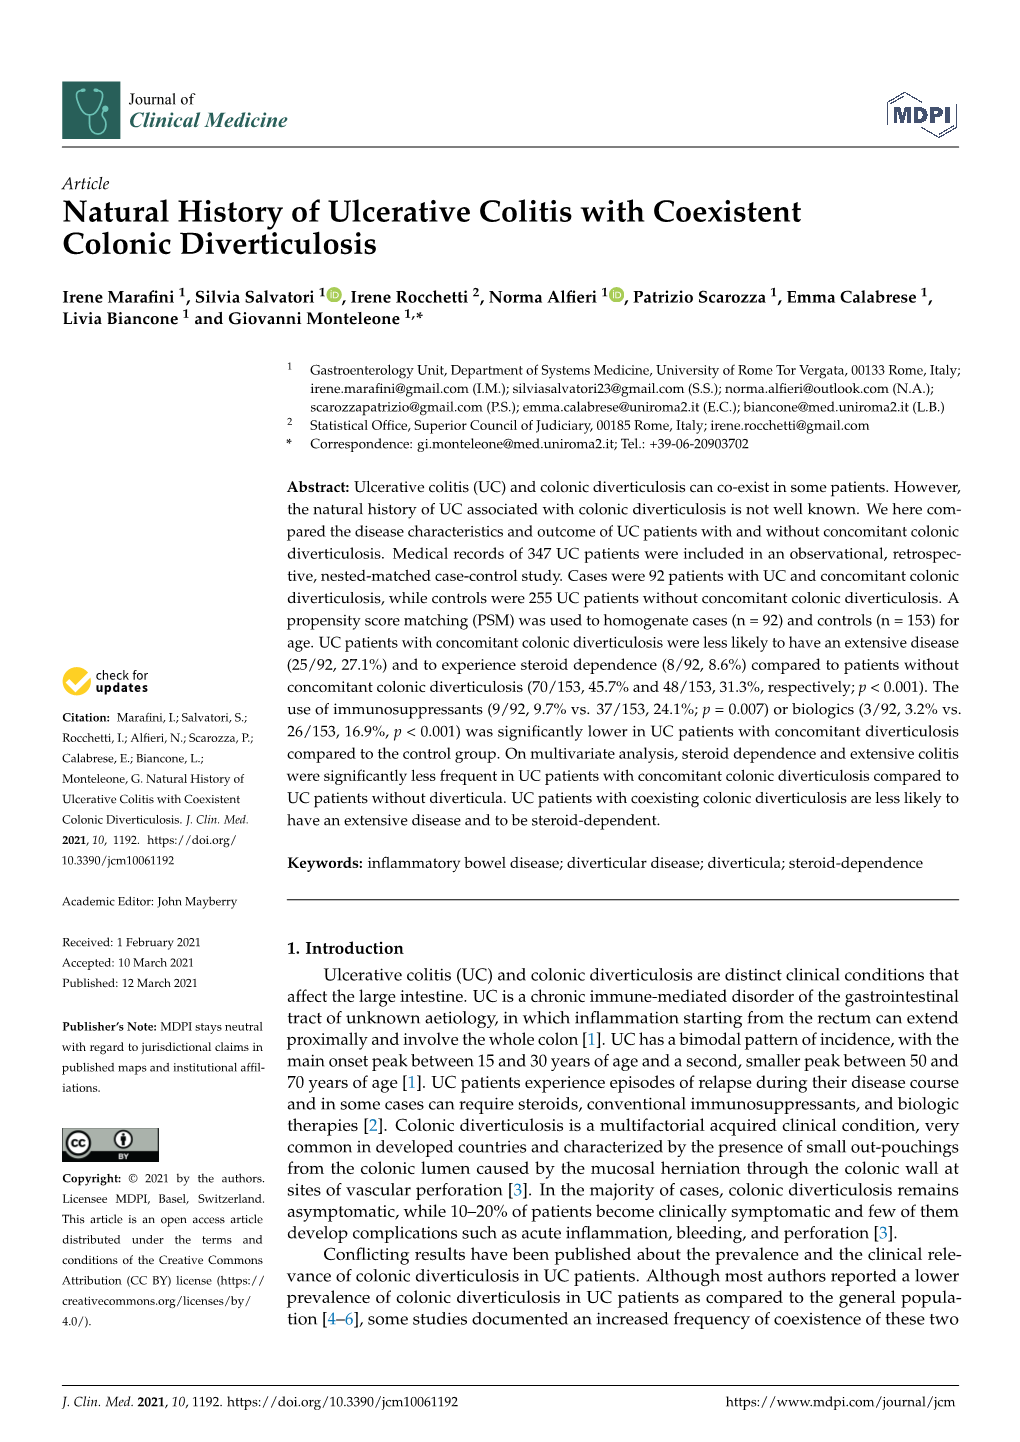 Natural History of Ulcerative Colitis with Coexistent Colonic Diverticulosis